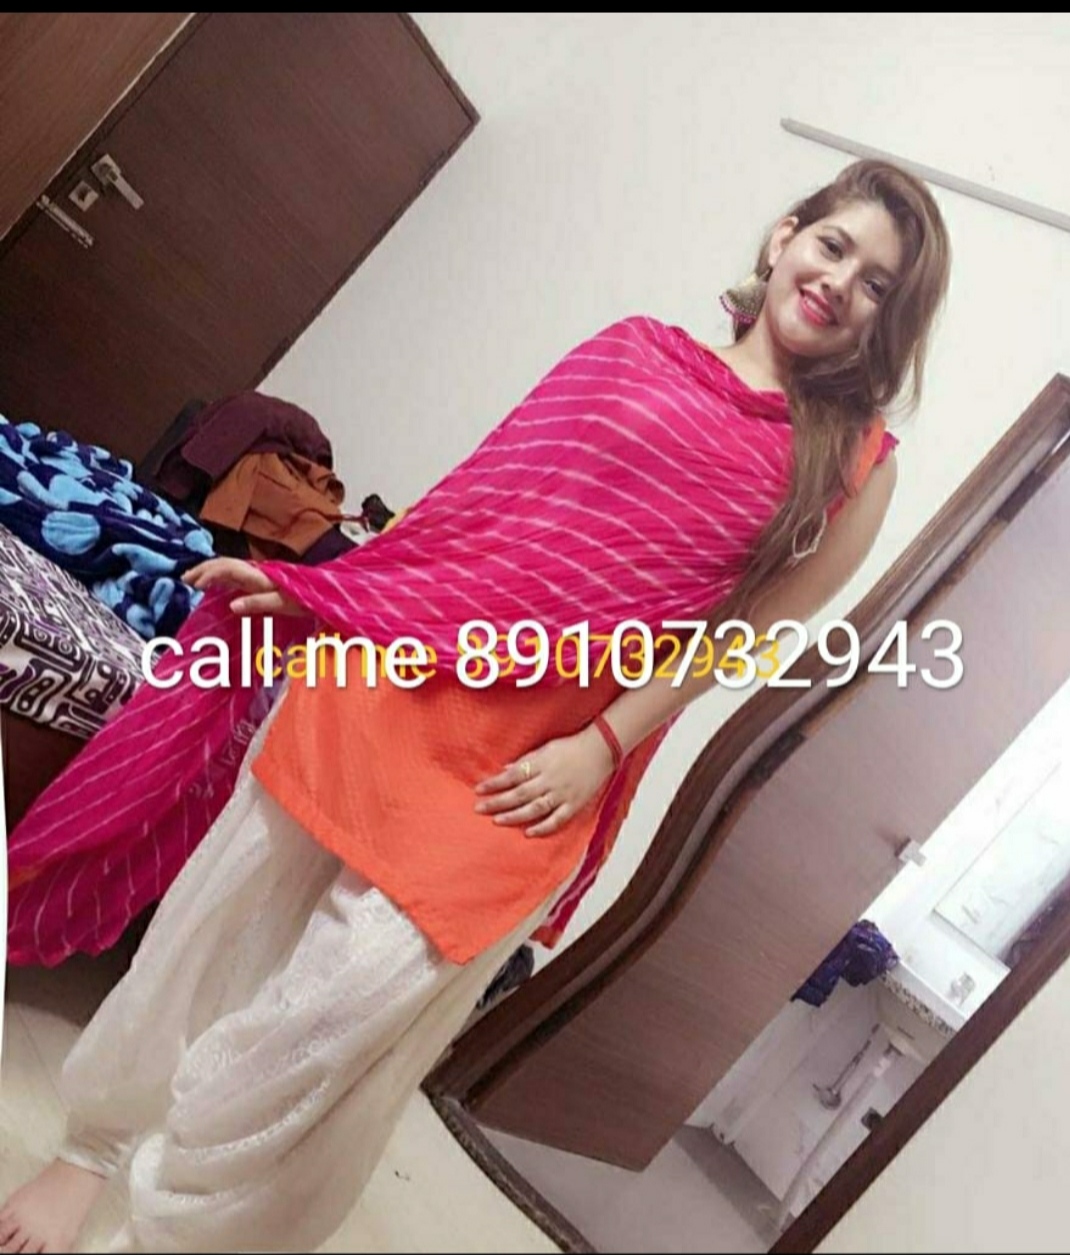 Low price escorts service available anytime jdhj